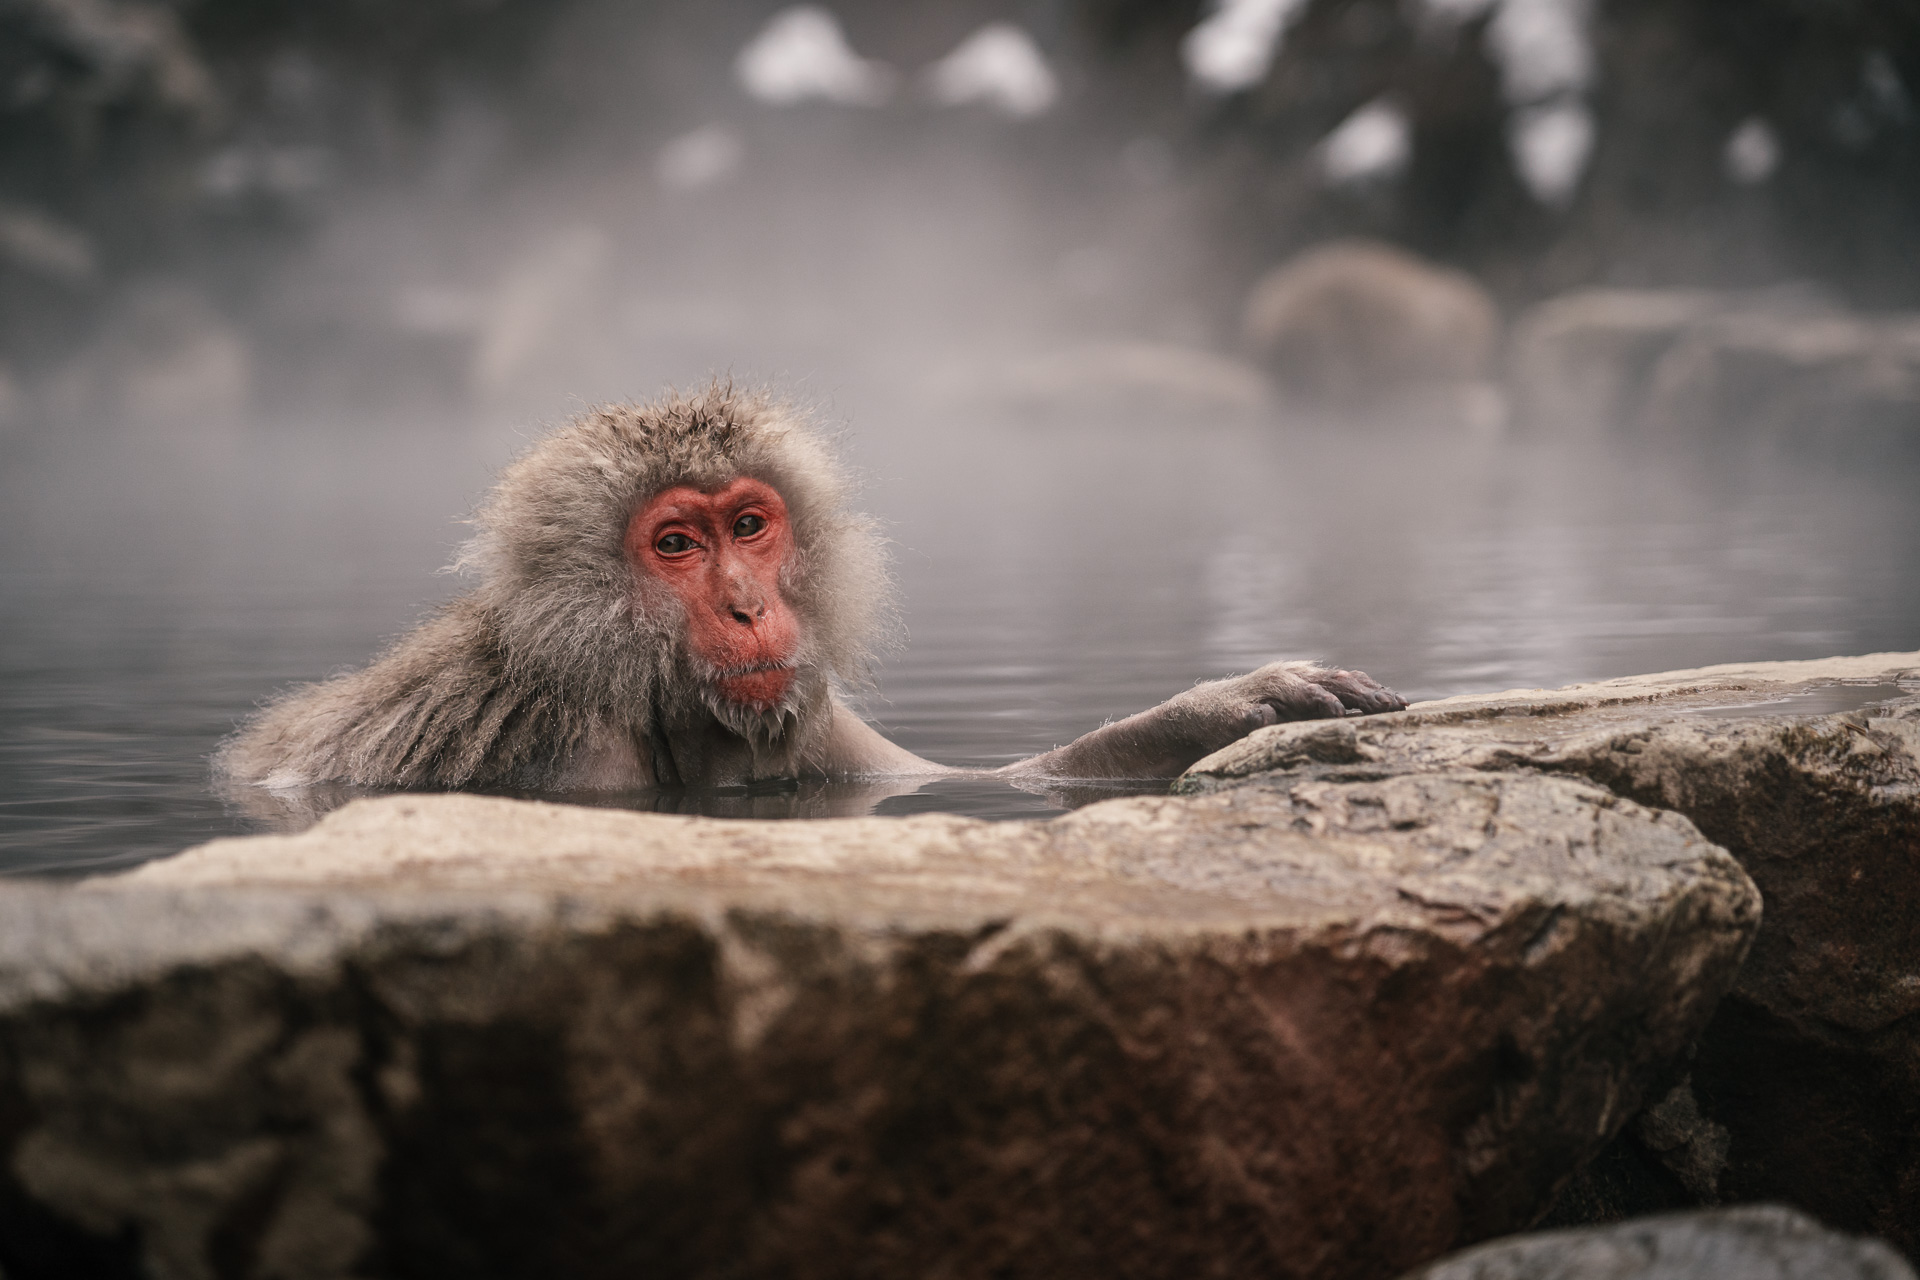 Jigokudani monkey park: the most famous hot spring with monkeys in Japan